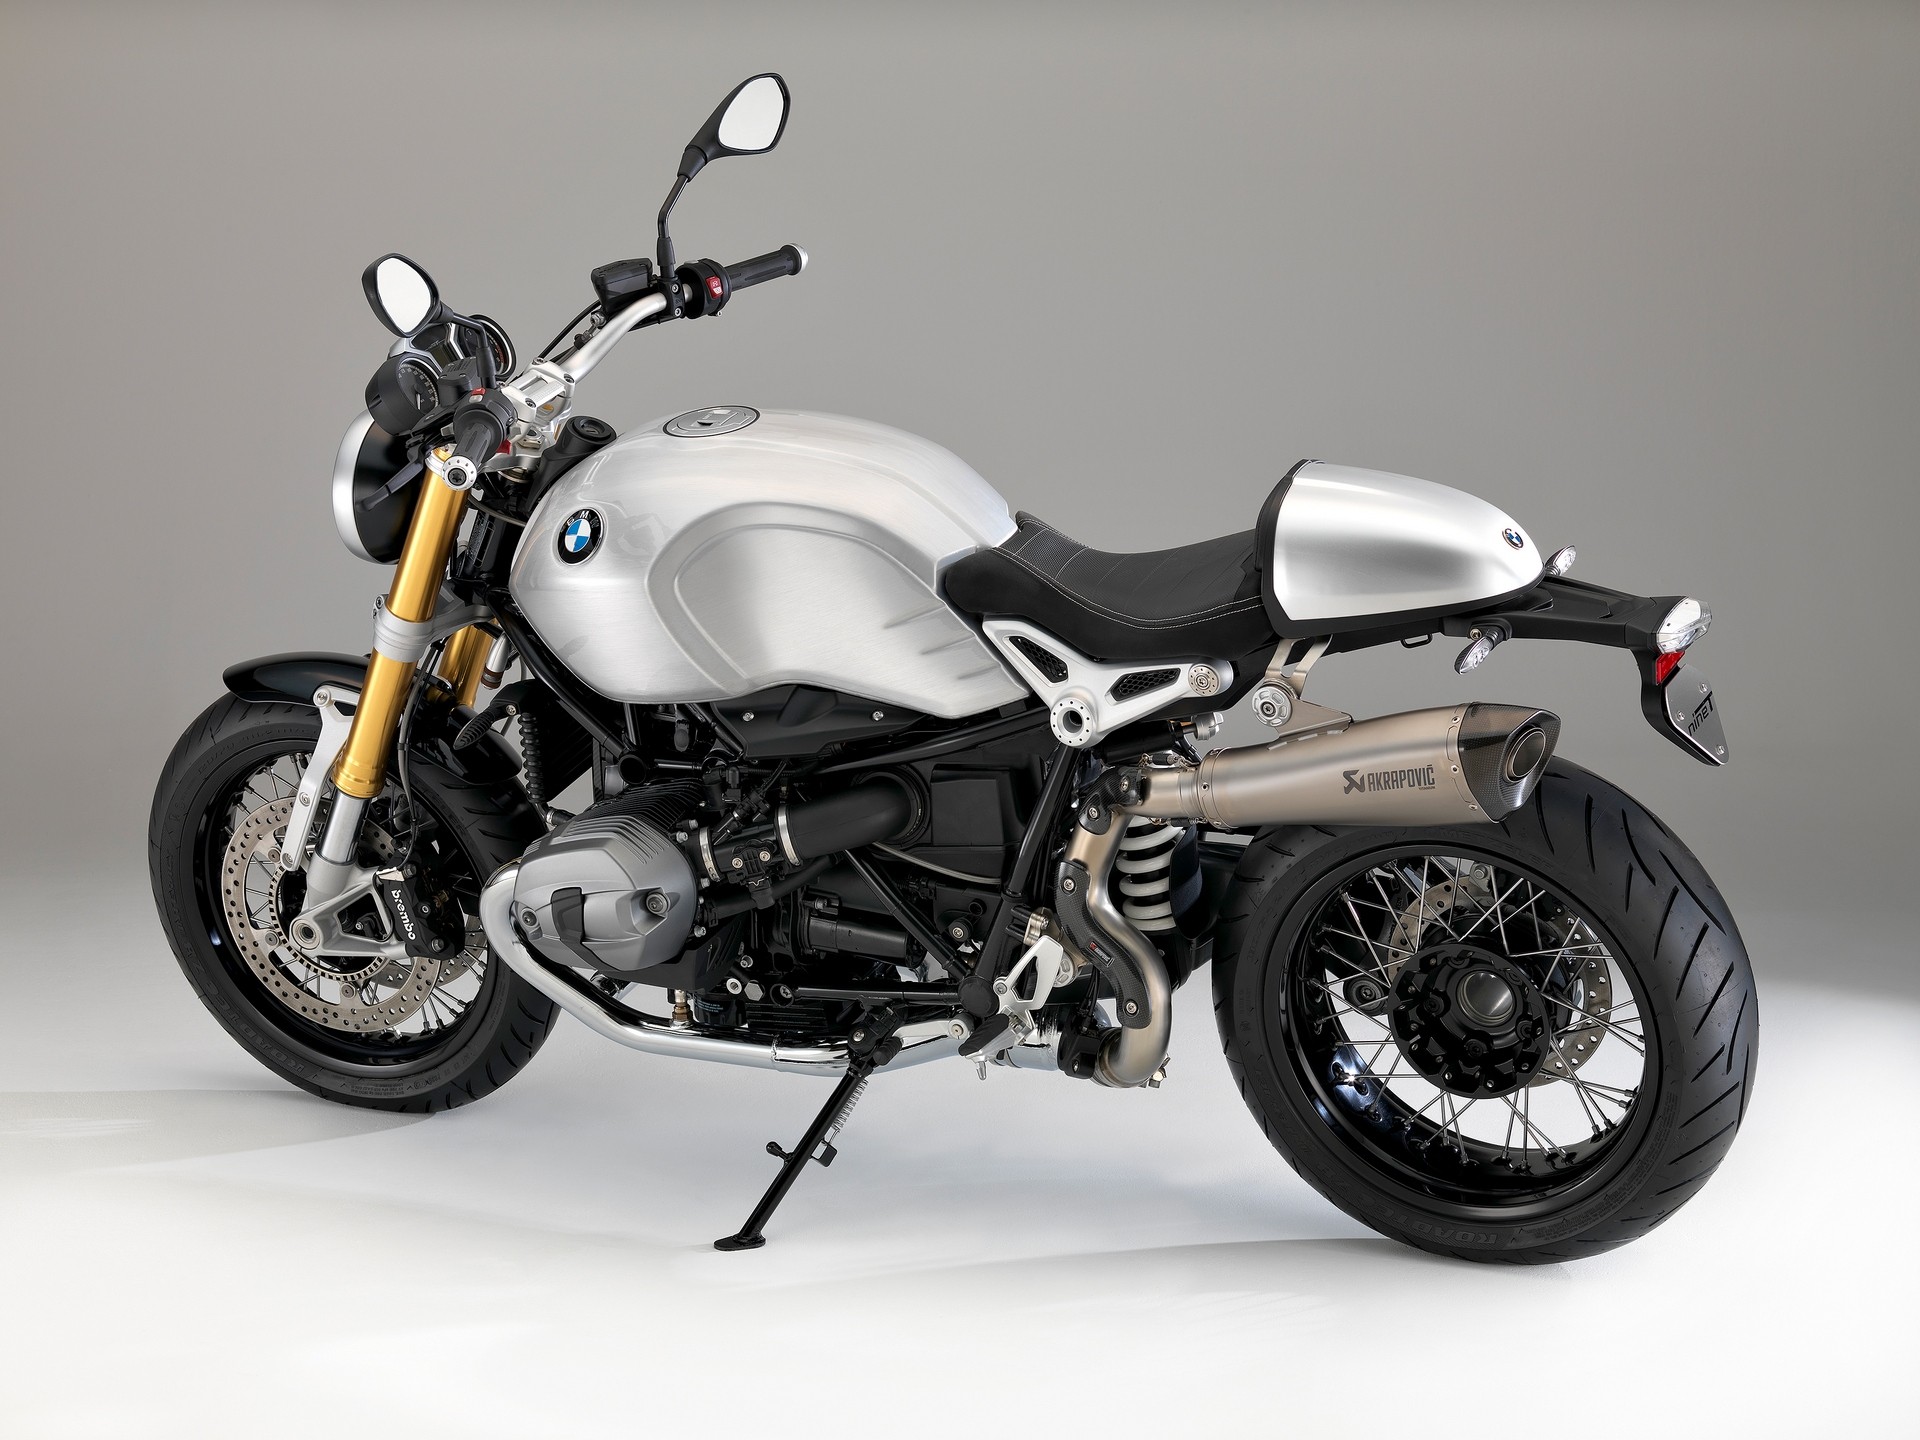 bmw-introduces-hand-brushed-aluminium-tanks-for-the-r-ninet-photo-gallery_7.jpg